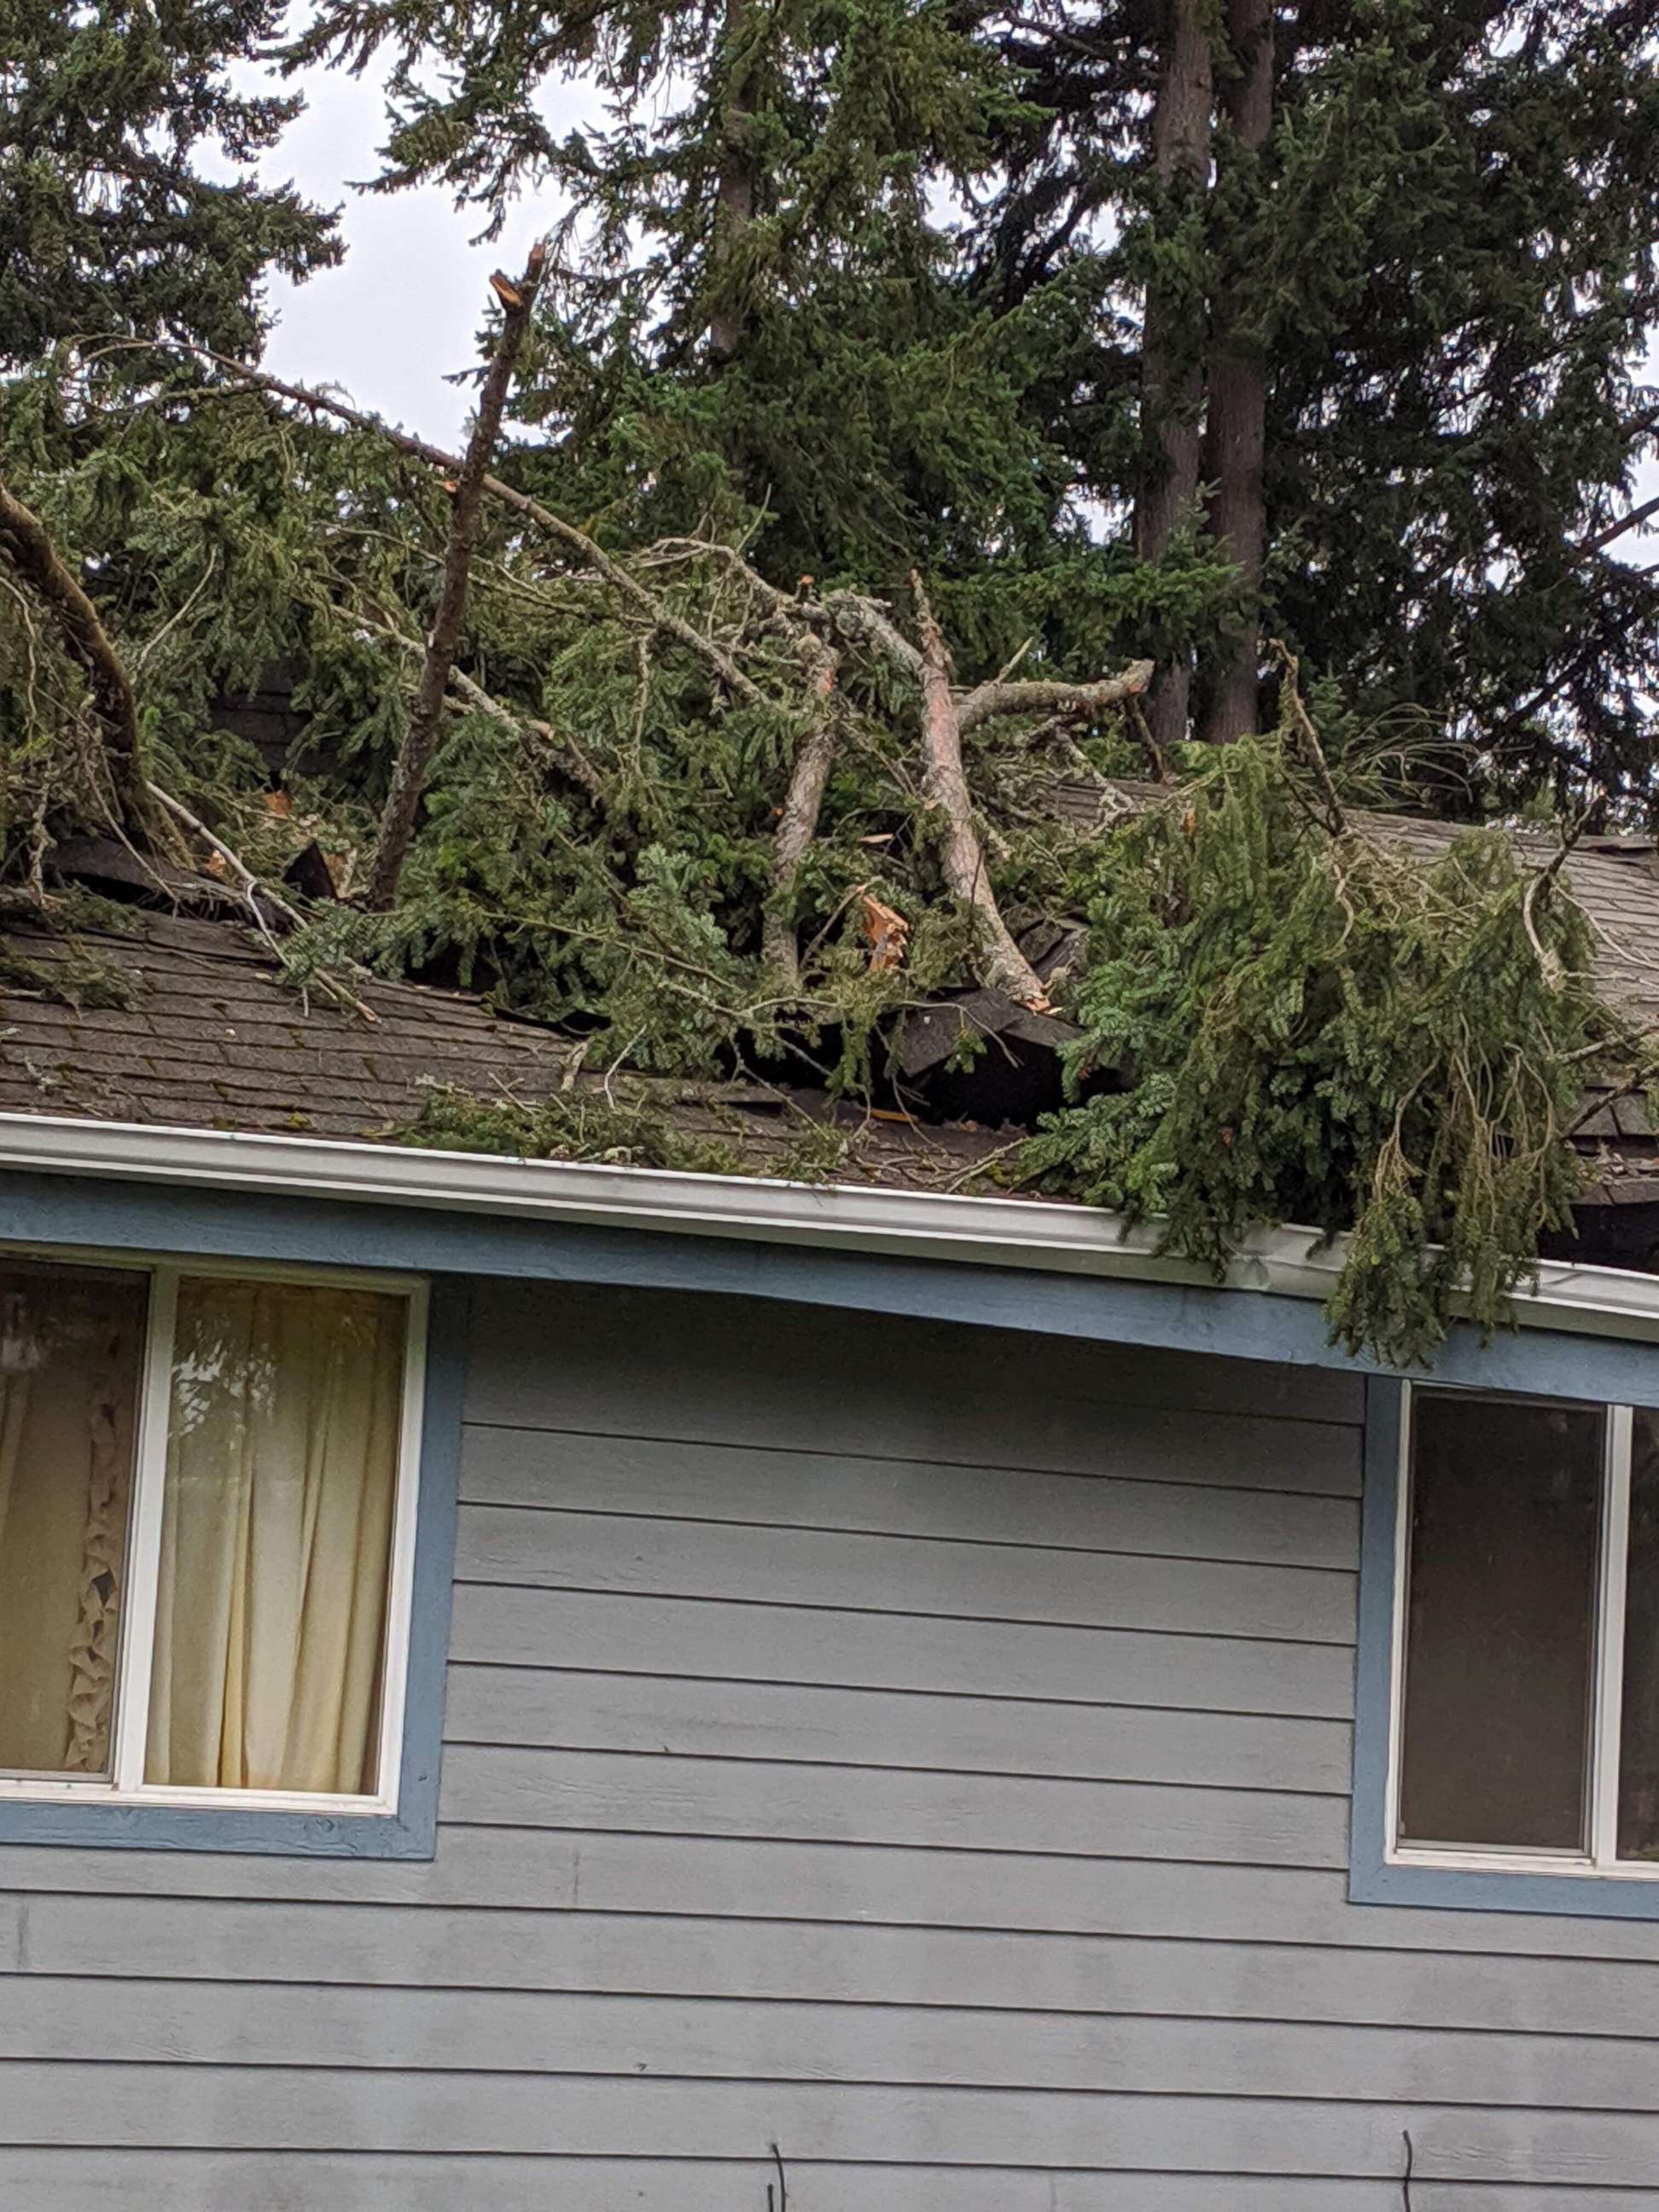 PHOTO: Aja Hauff was feeding her 1-month-old daughter, Ava, when the tree crashed through her home on Oct. 7, 2019 in Lakewood, Washington.